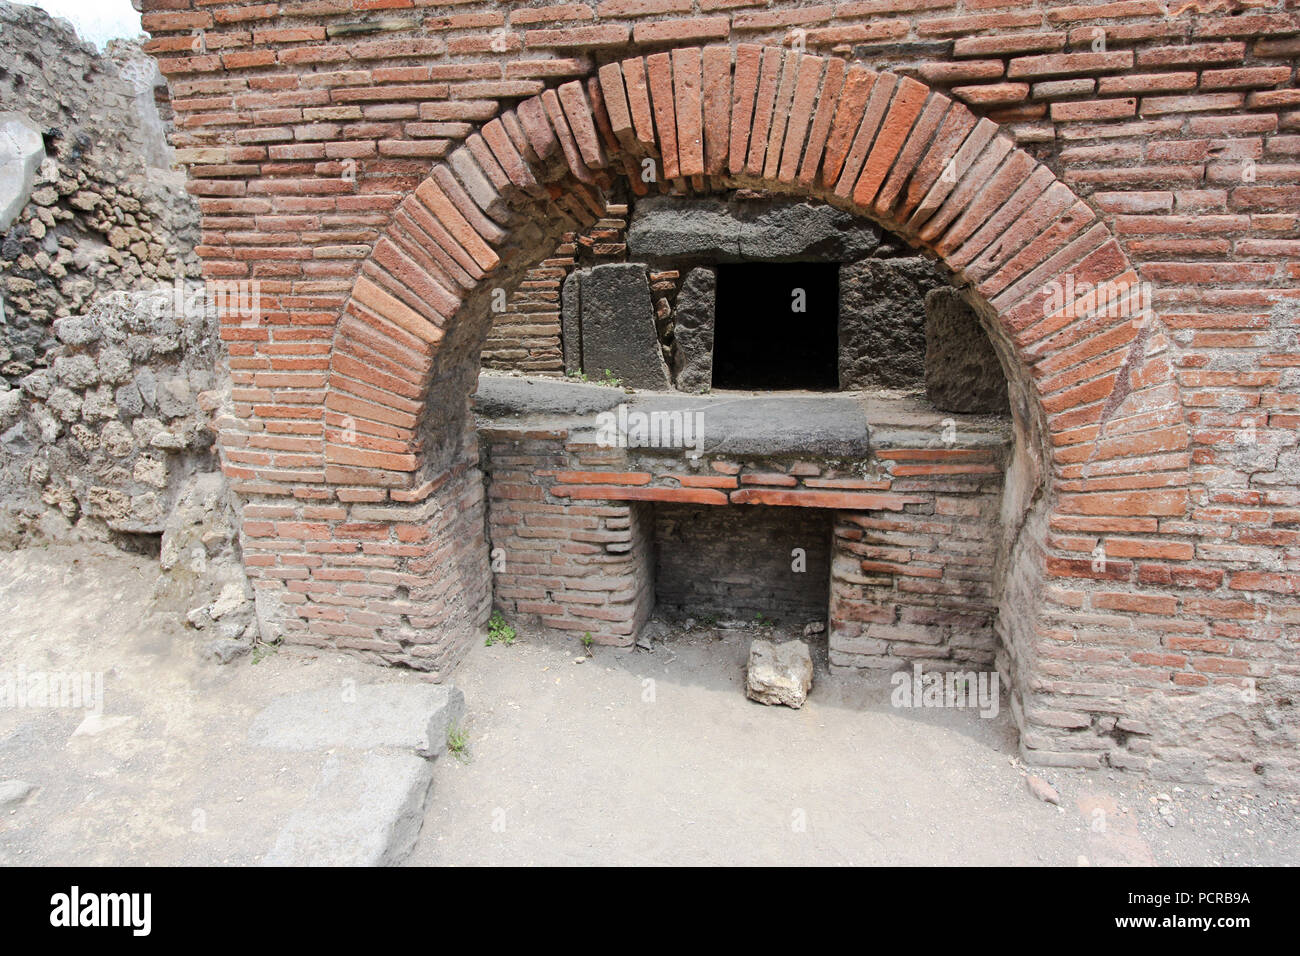 Masoned clay oven at the House of the Baker, the Casa del Forno, an ancient bakery at the ancient city of Pompeii, near Naples, Italy Stock Photo